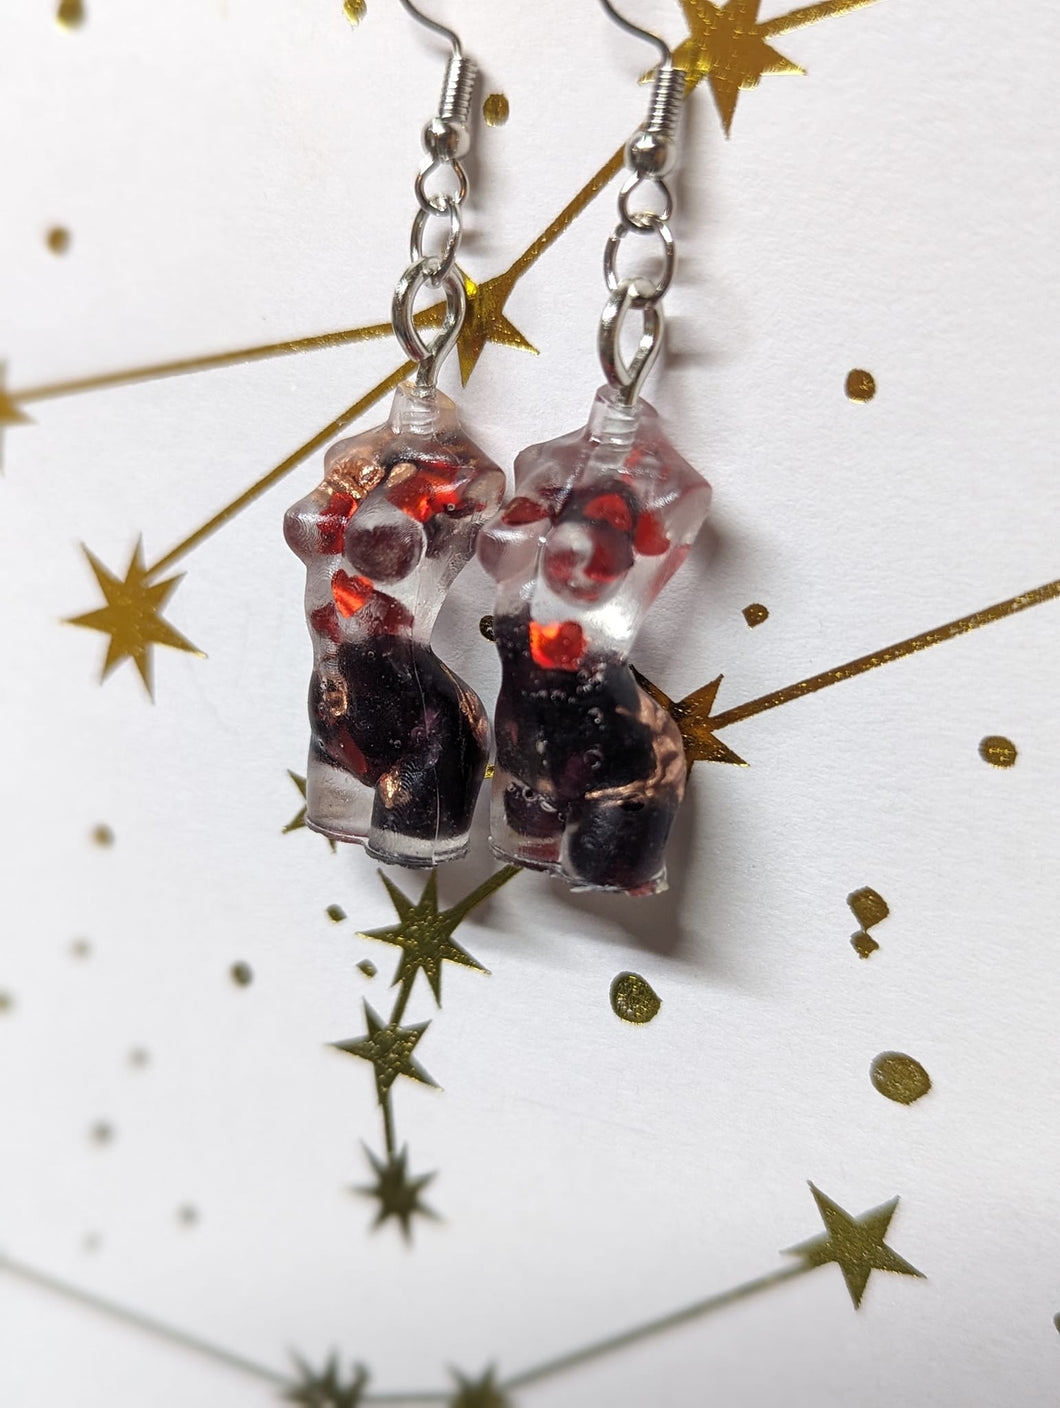 Goddess dangle earrings with copper and garnet for valentines day